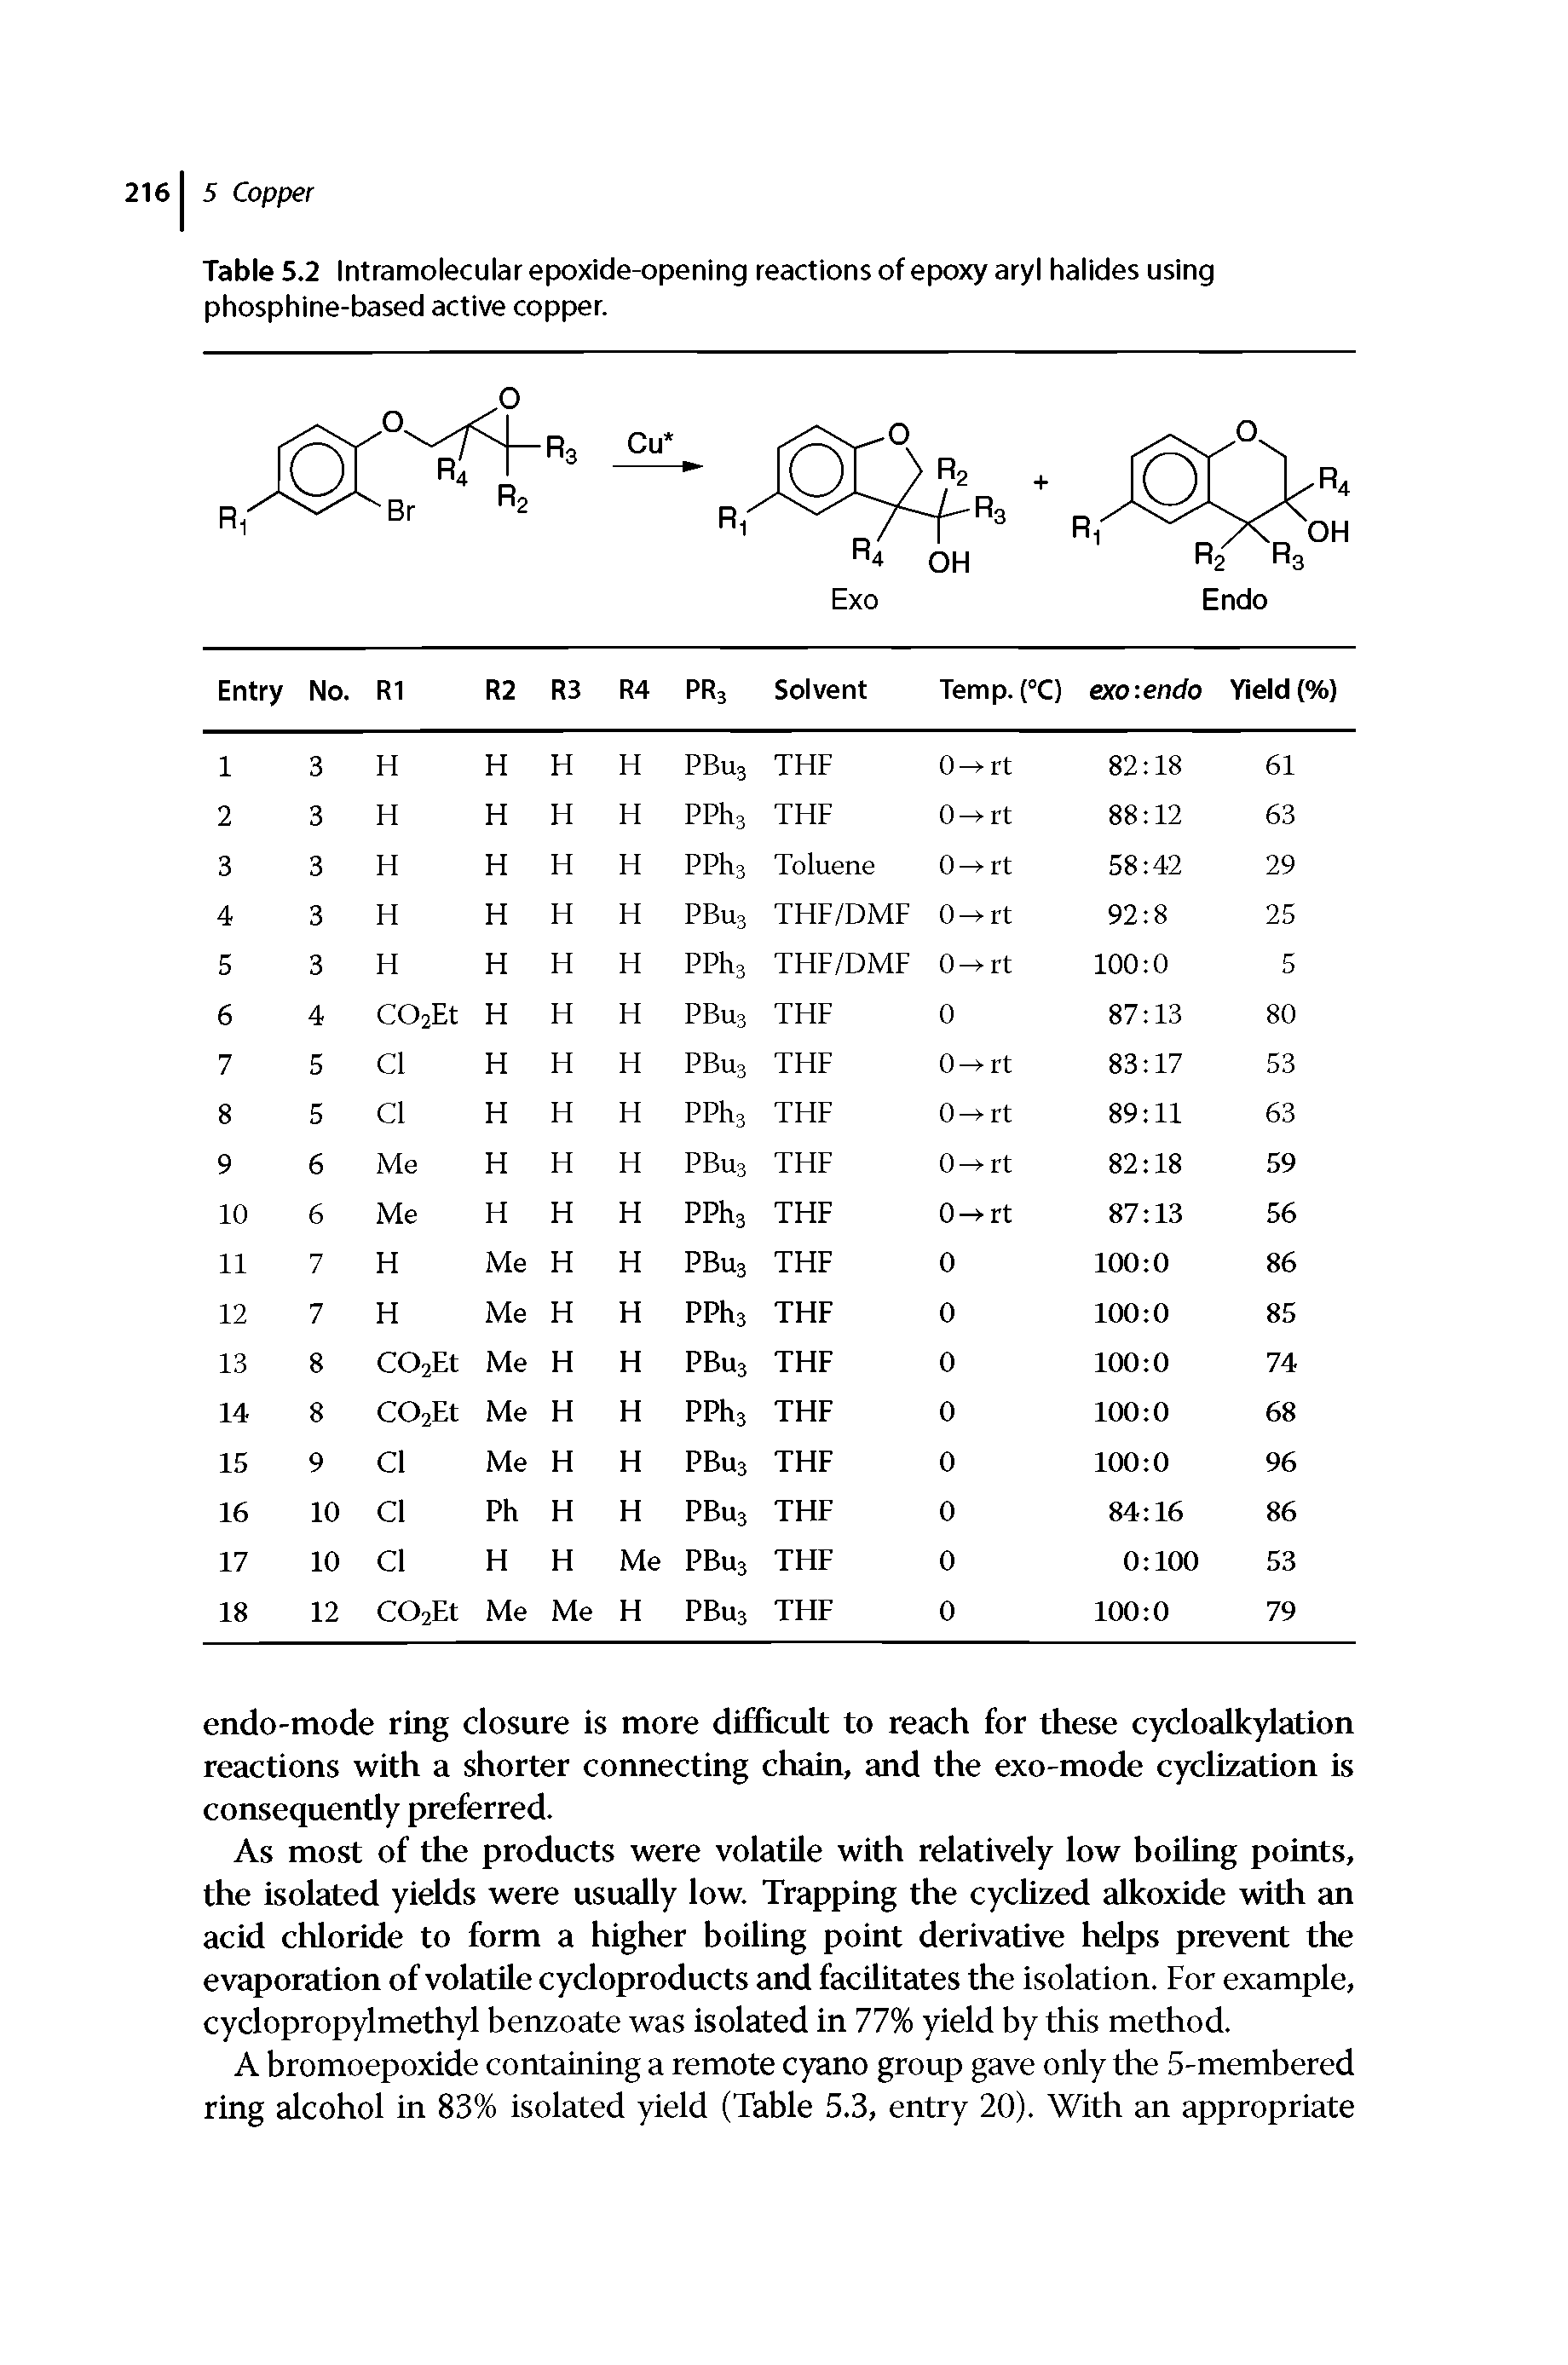 Table 5.2 Intramolecular epoxIde-openIng reactions of epoxy aryl halides using phosphine-based active copper.